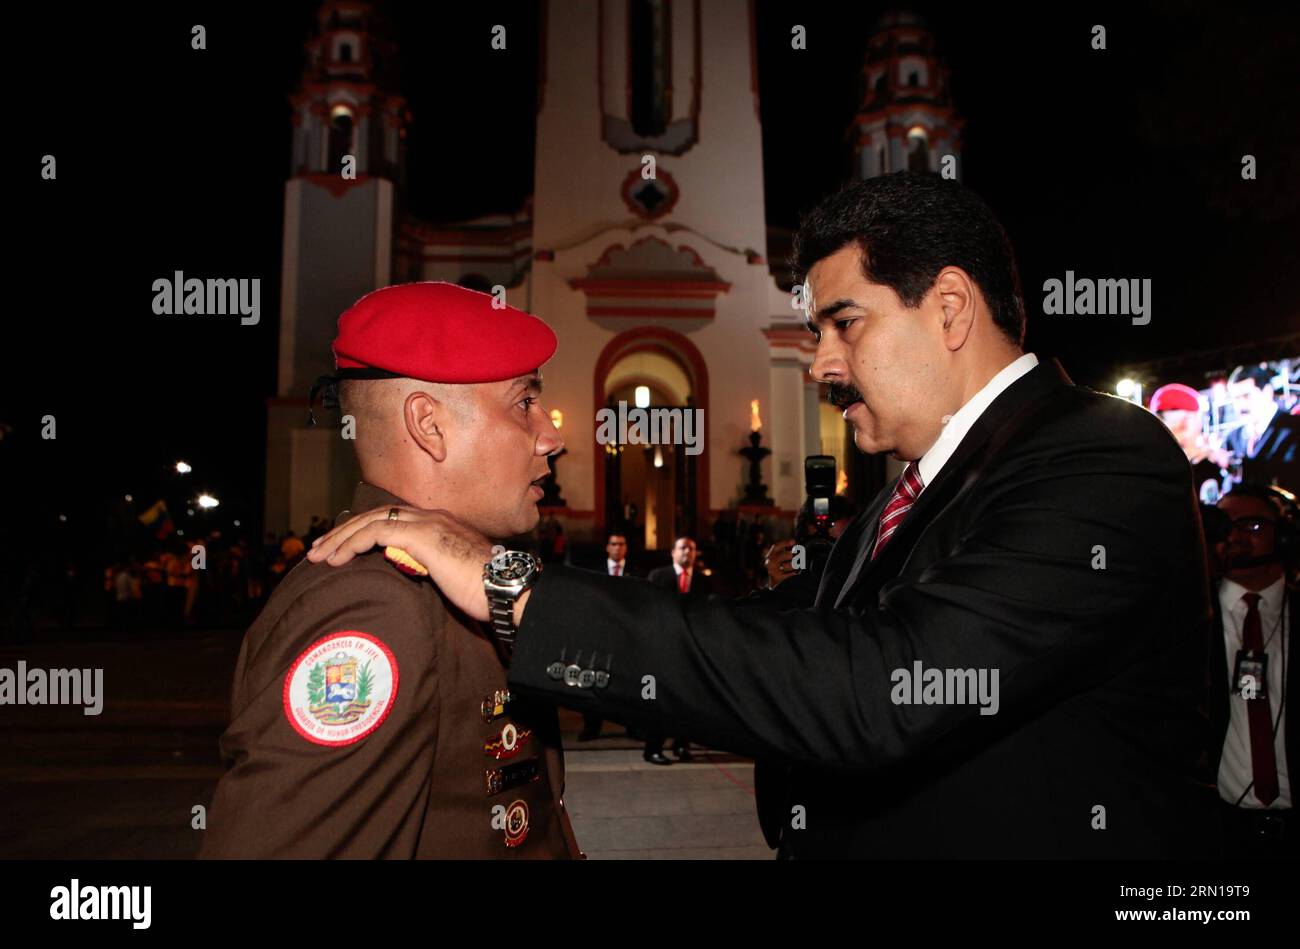 CARACAS, Dec. 9, 2014 -- Image provided by shows Venezuelan President Nicolas Maduro (R) talking with a soldier during a ceremony marking the 190th anniversary of the Battle of Ayacucho, at the National Pantheon in Caracas, Venezuela, on Dec. 9, 2014. ) VENEZUELA-CARACAS-POLITICS-MADURO VENEZUELA SxPRESIDENCY PUBLICATIONxNOTxINxCHN   Caracas DEC 9 2014 Image provided by Shows Venezuelan President Nicolas Maduro r Talking With a Soldier during a Ceremony marking The 190th Anniversary of The Battle of Ayacucho AT The National Pantheon in Caracas Venezuela ON DEC 9 2014 Venezuela Caracas POLITICS Stock Photo